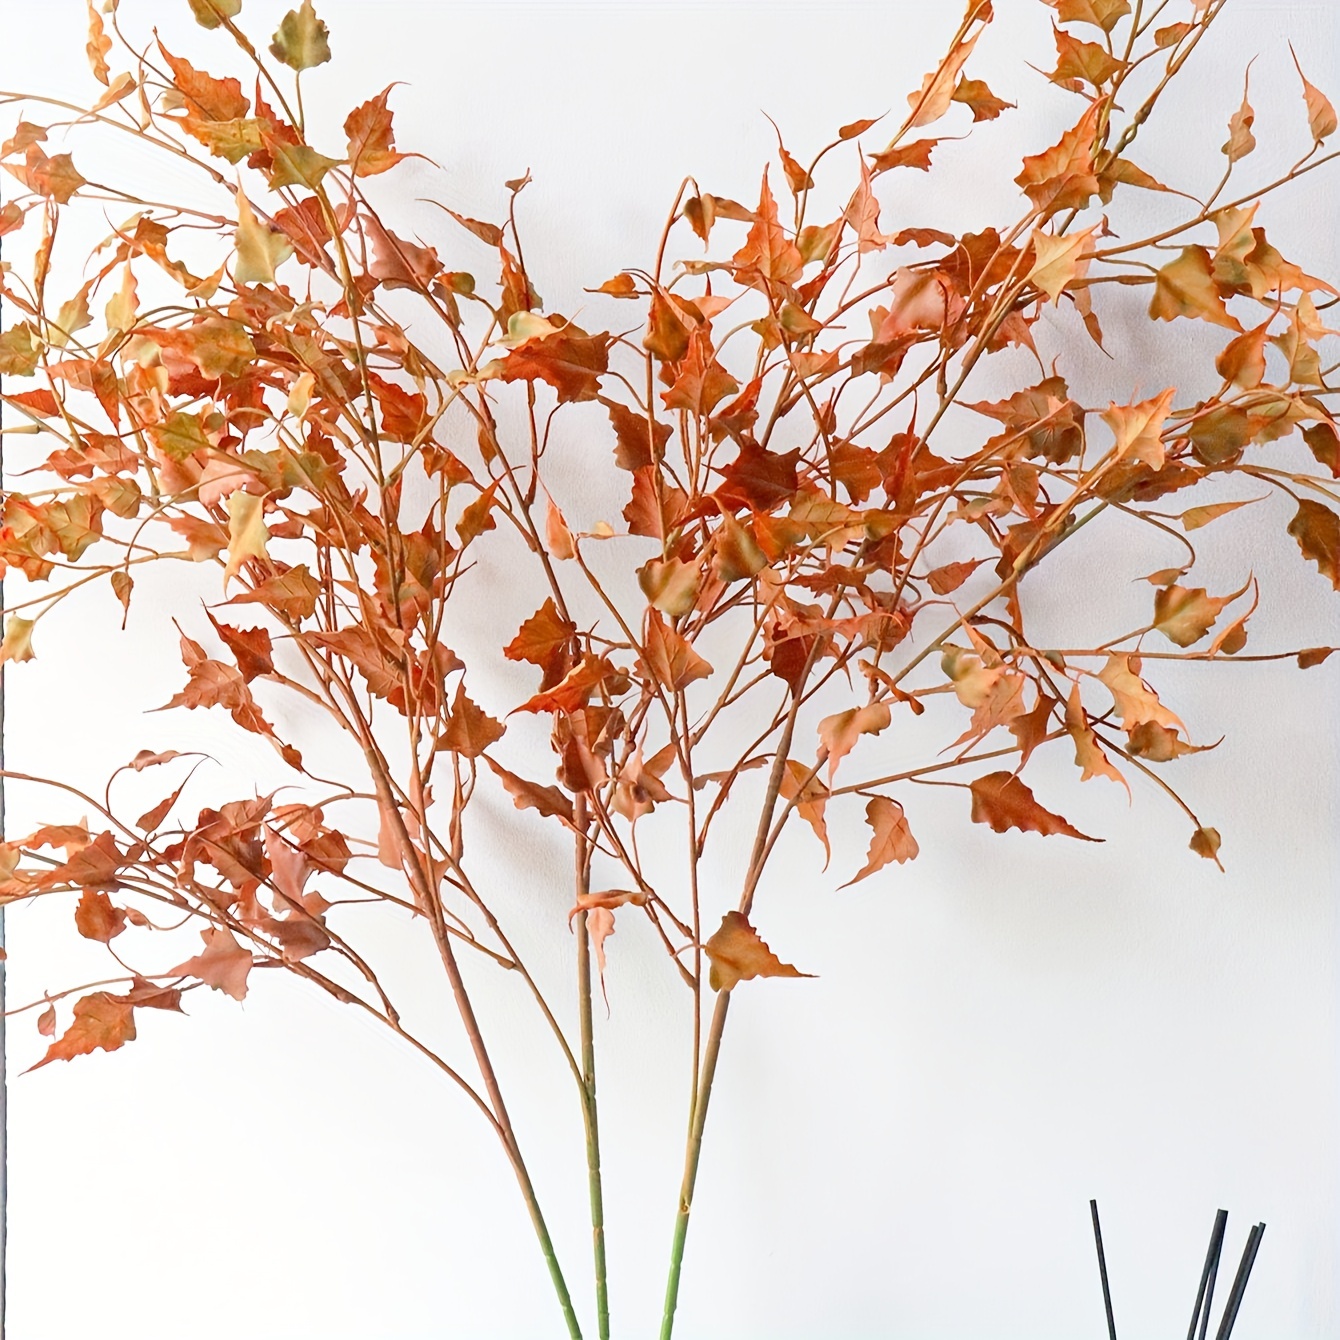 

1pc Artificial Fake Fall Plants, Fall Maple Leaves Stems, Autumn Flowers Branches Greenery Stems For Thanksgiving Table Centerpiece Home Decor, Vase Party Wreath Garden Decor